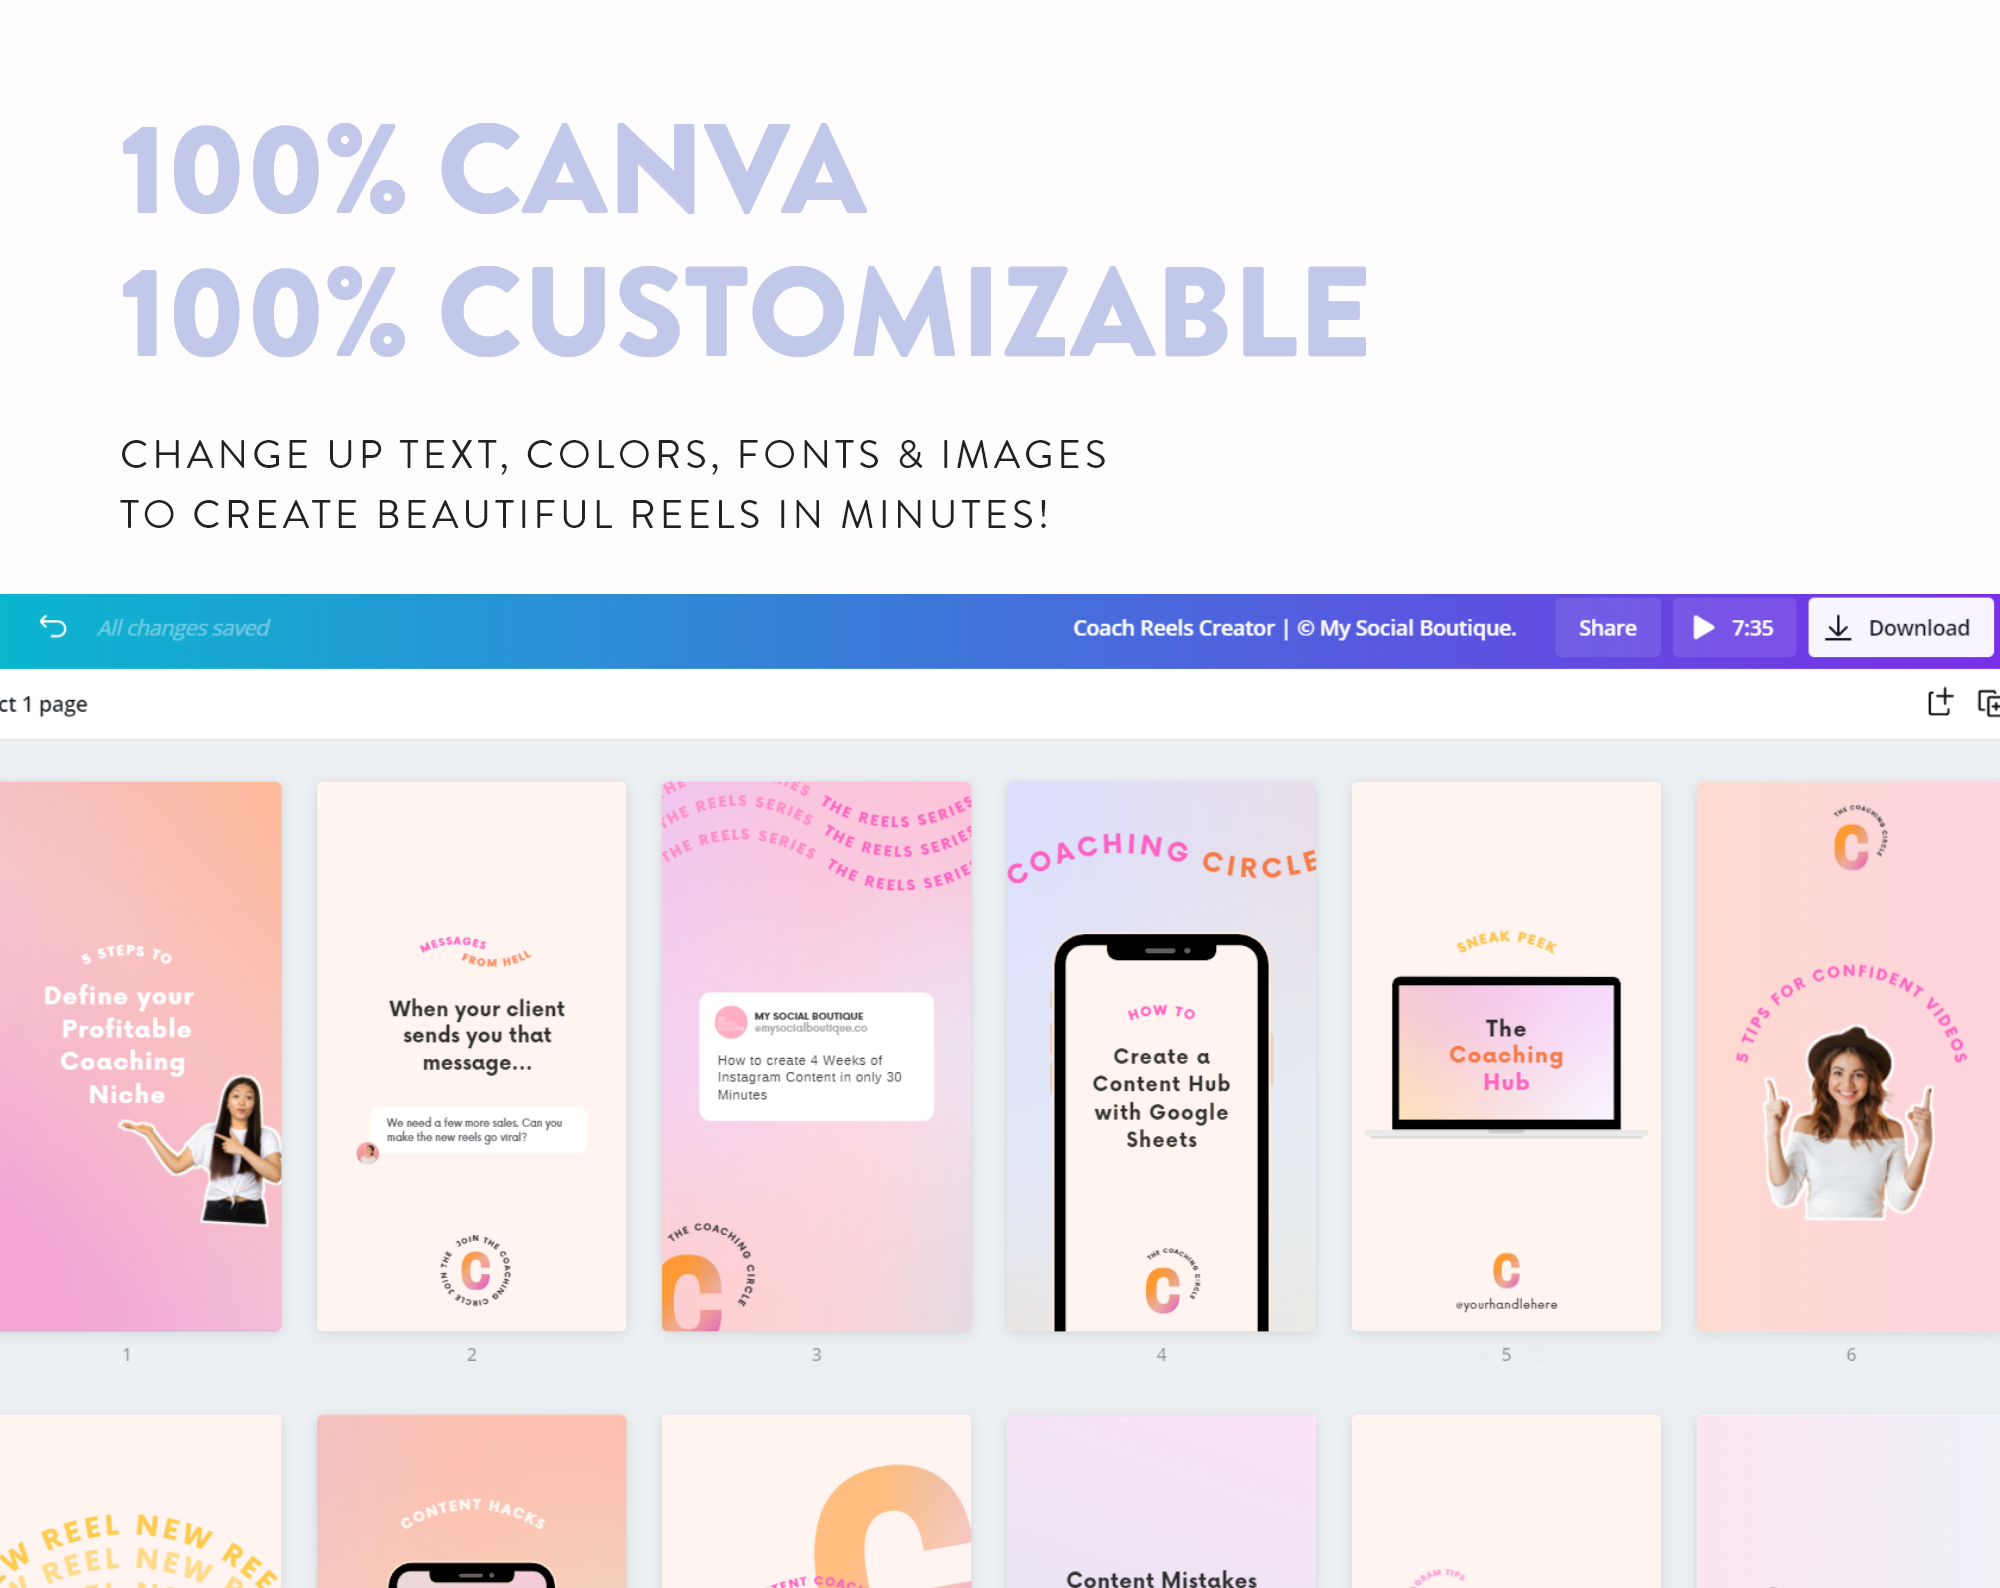 Coach-instagram-reels-templates-for-canva-customize-7